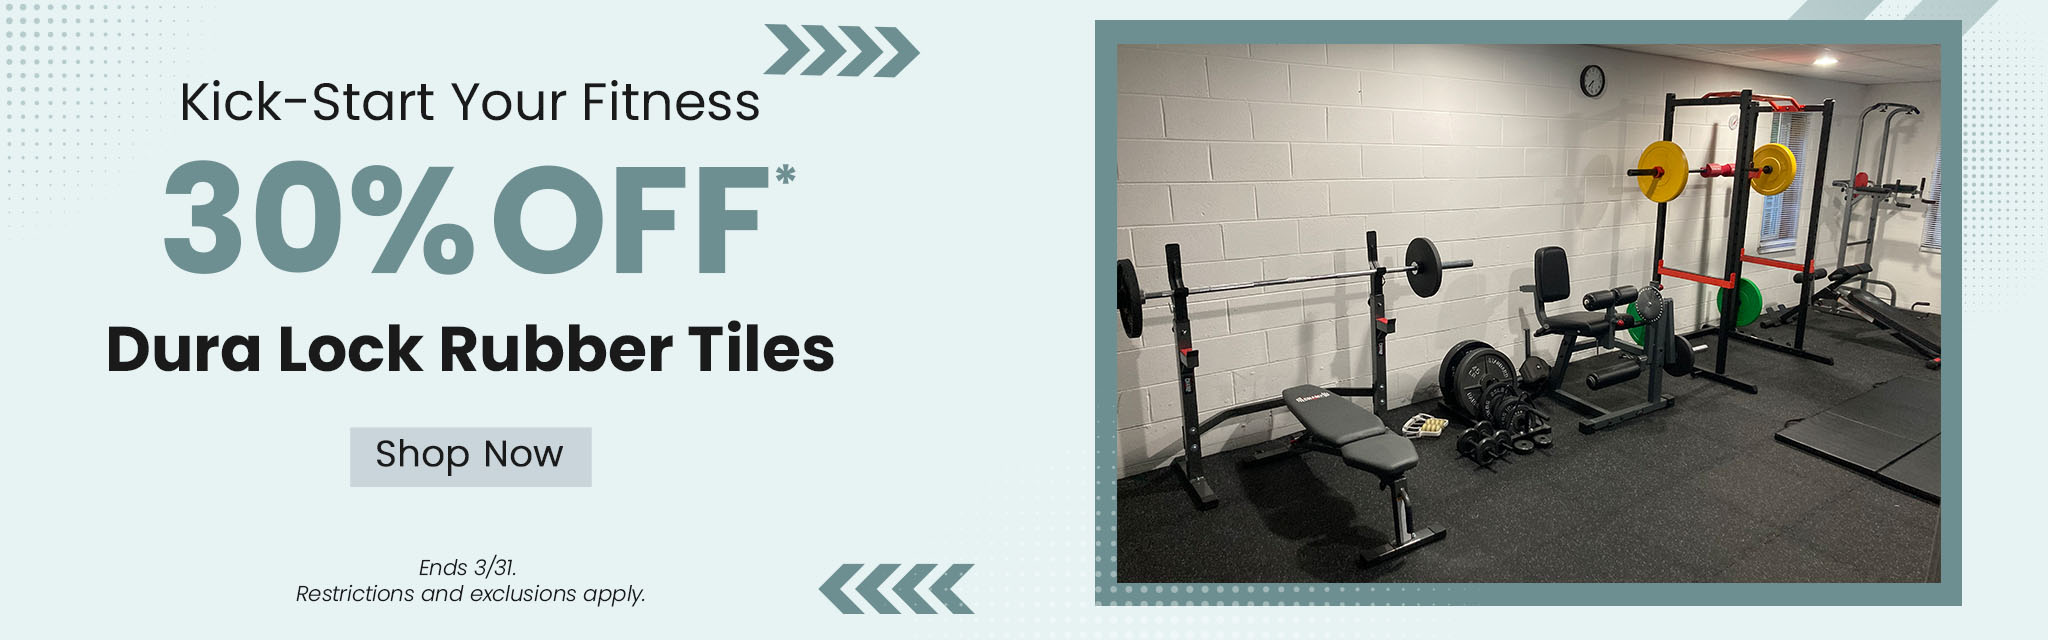 Kick-Start your Fitness. 30% Off Dura Lock Rubber Tiles. Shop Now. Ends March 31st. Restrictions apply